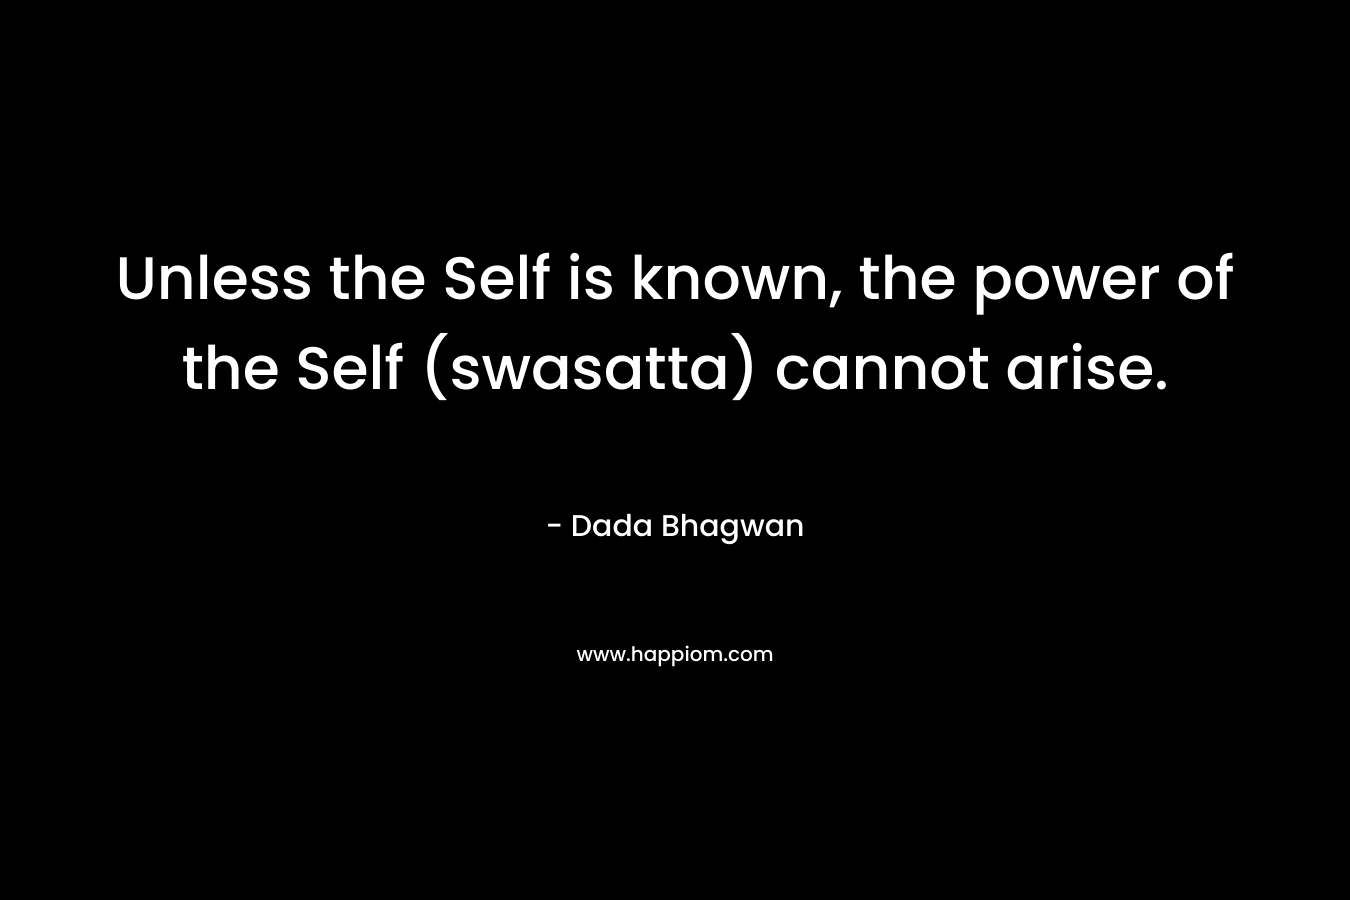 Unless the Self is known, the power of the Self (swasatta) cannot arise.